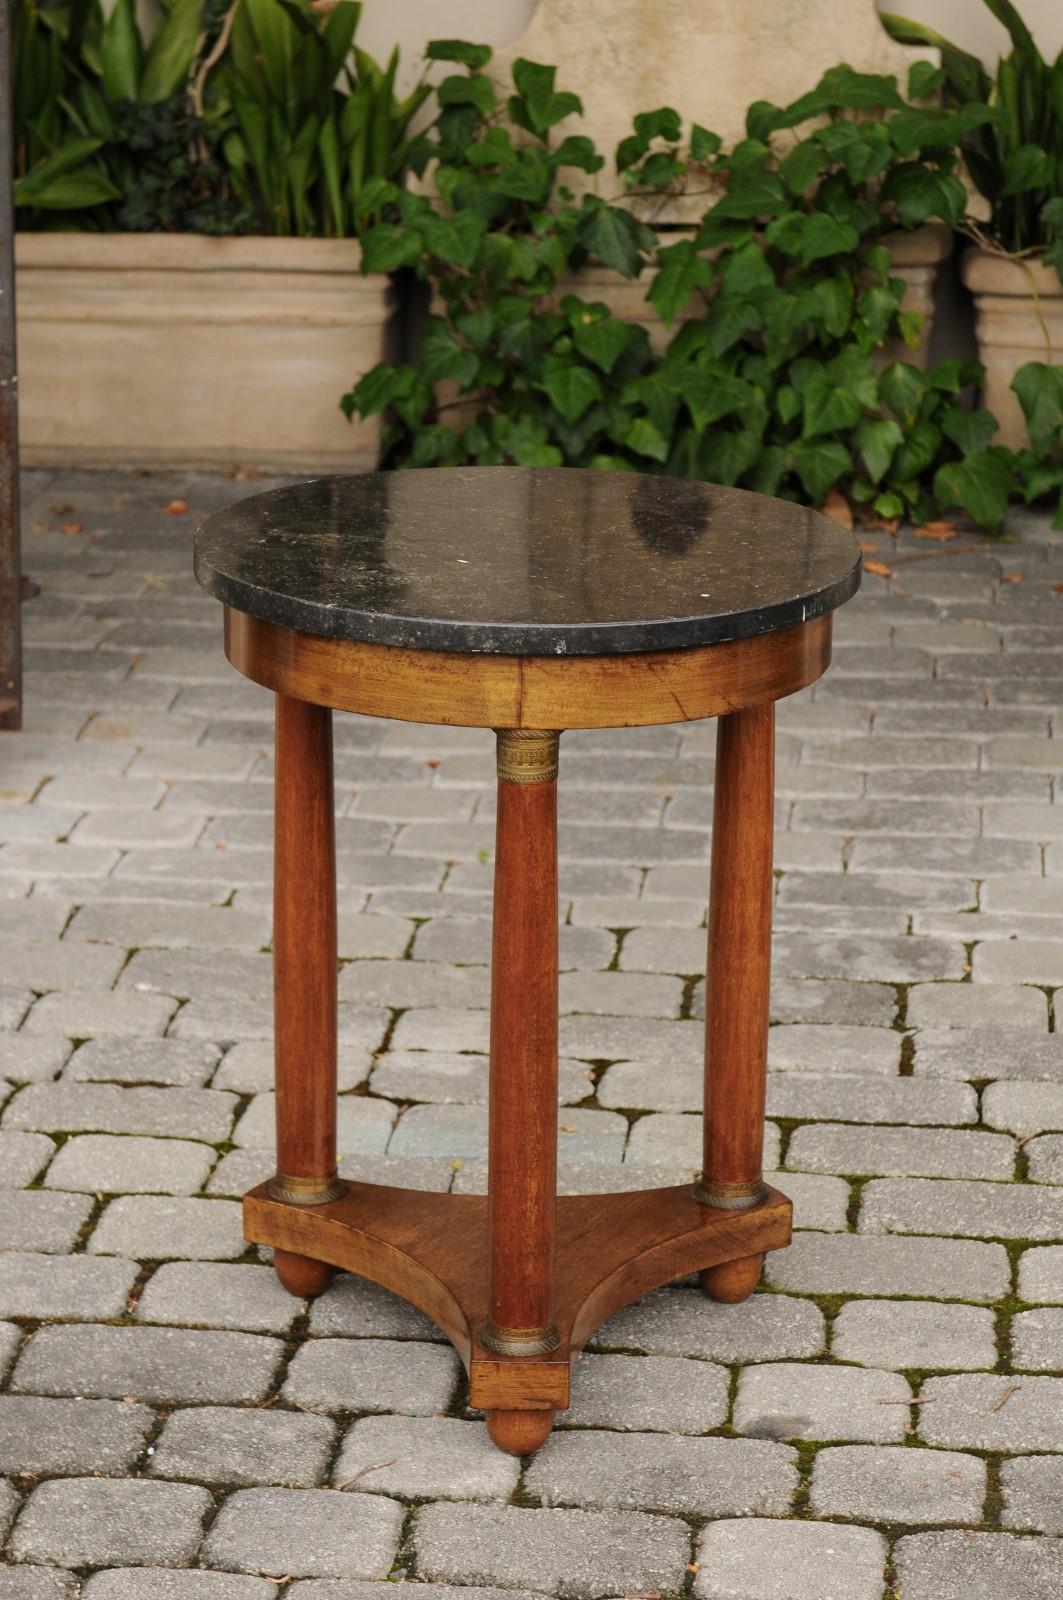 A French Empire style walnut guéridon side table from the late 19th century, with black marble top and bronze mounts. Born in France during the third quarter of the 19th century, this handsome guéridon features a circular black marble top, sitting